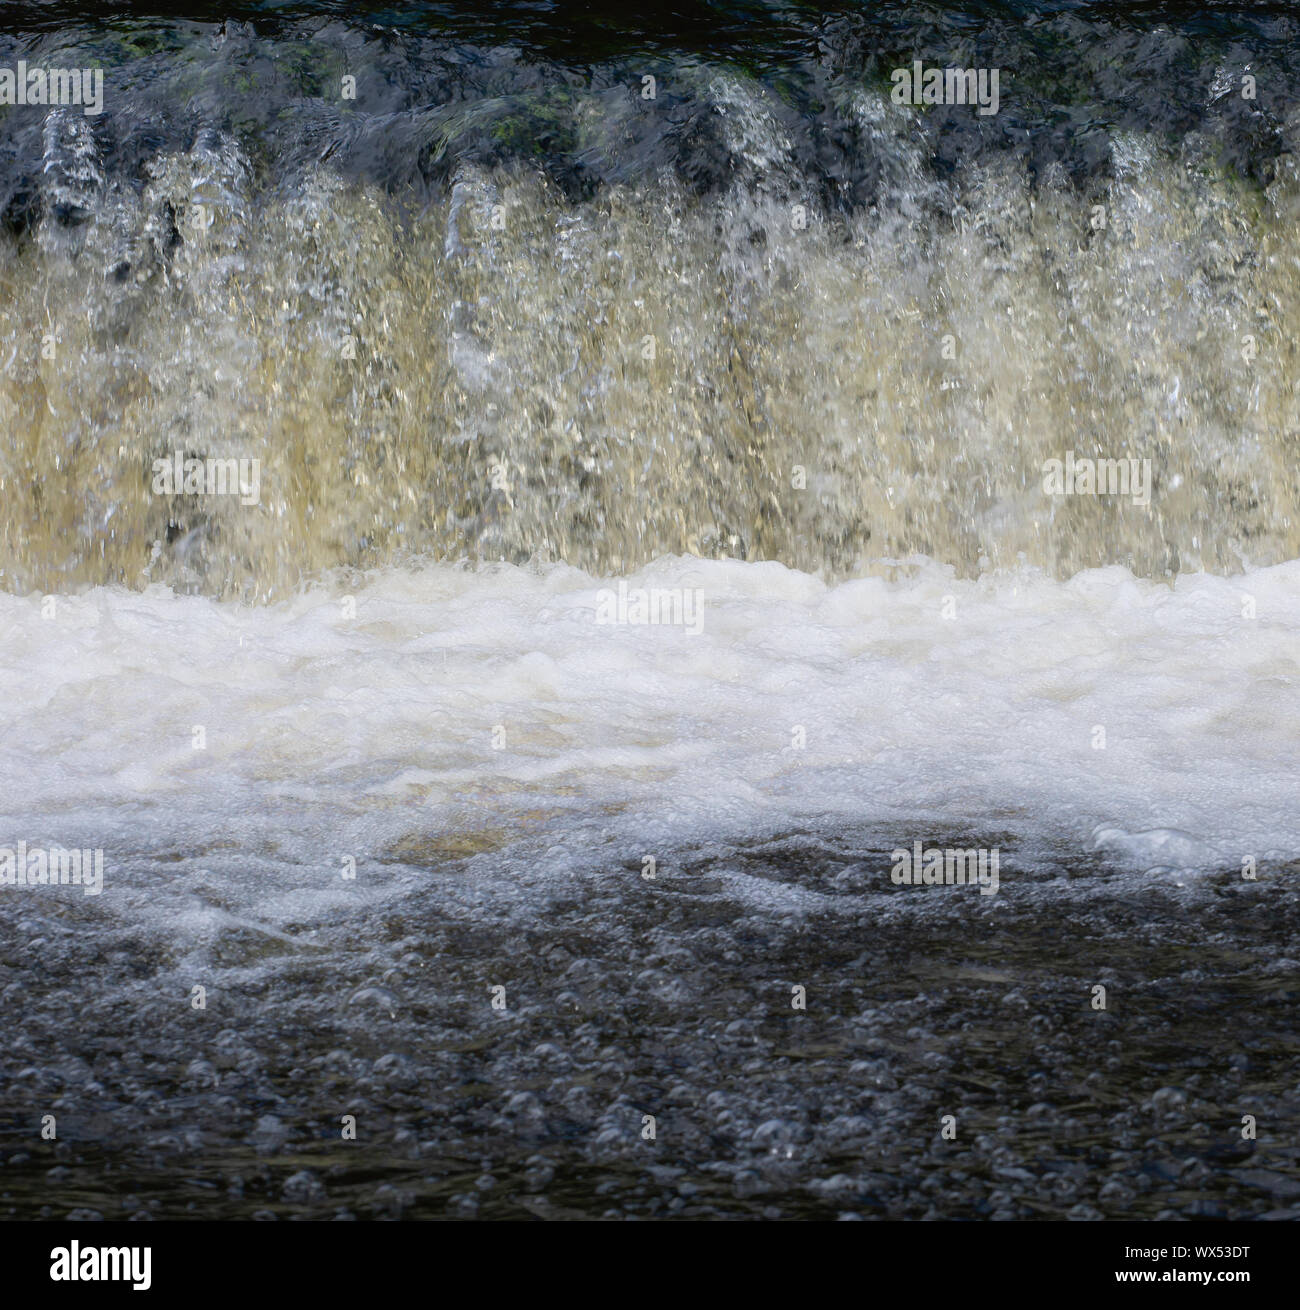 Multiple exposure with fast and slow shutters speeds of a short waterfall Stock Photo